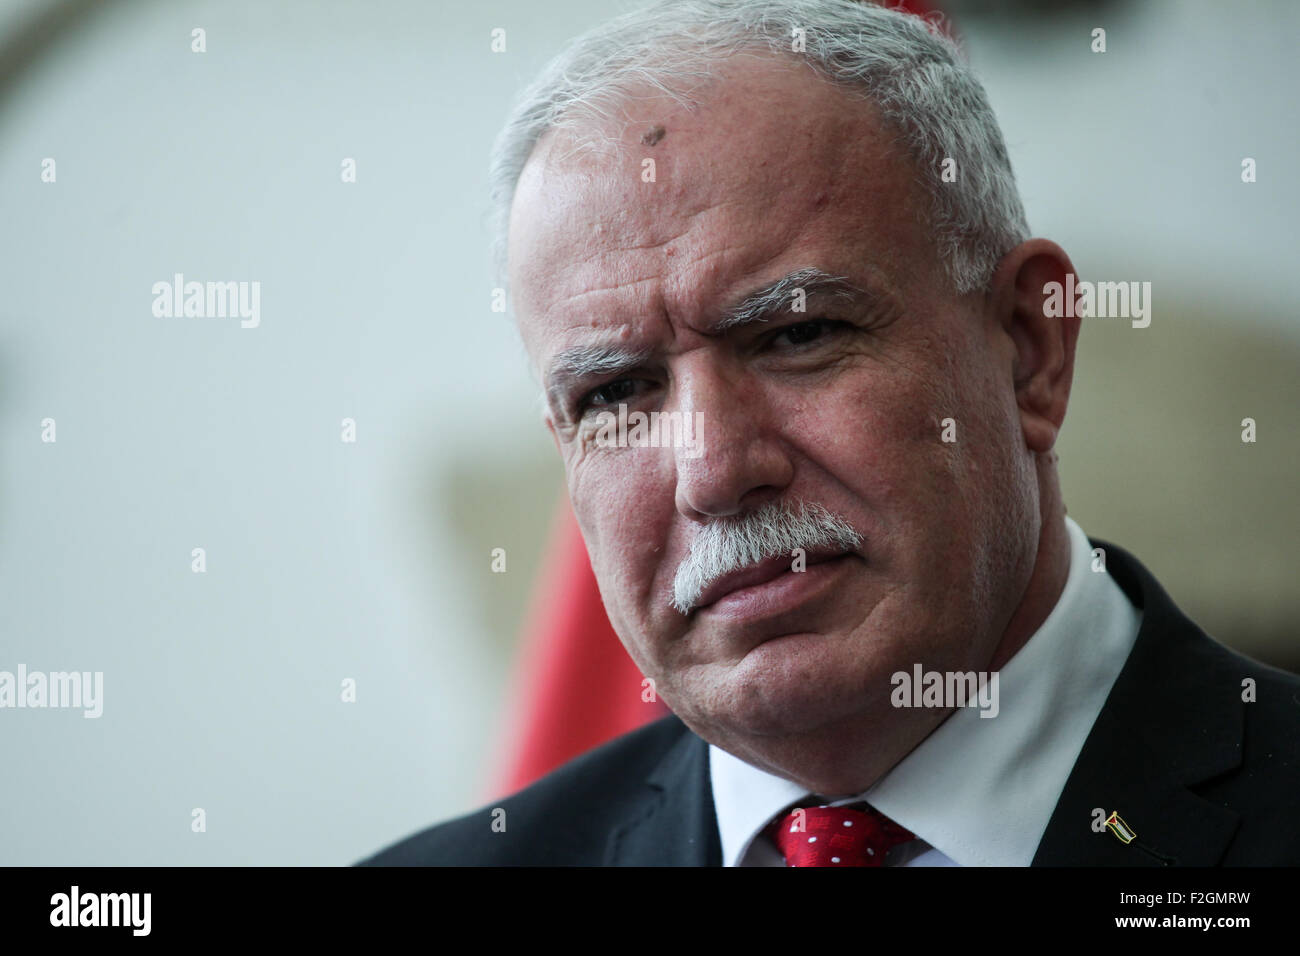 Caracas, Venezuela. 18th Sep, 2015. Palestinian Foreign Minister Riad al-Malki attends a press conference with his counterpart of Venezuela Delcy Rodriguez at the headquarters of the Foreing Ministry in Caracas, Venezuela, on Sept. 18, 2015. © Boris Vergara/Xinhua/Alamy Live News Stock Photo